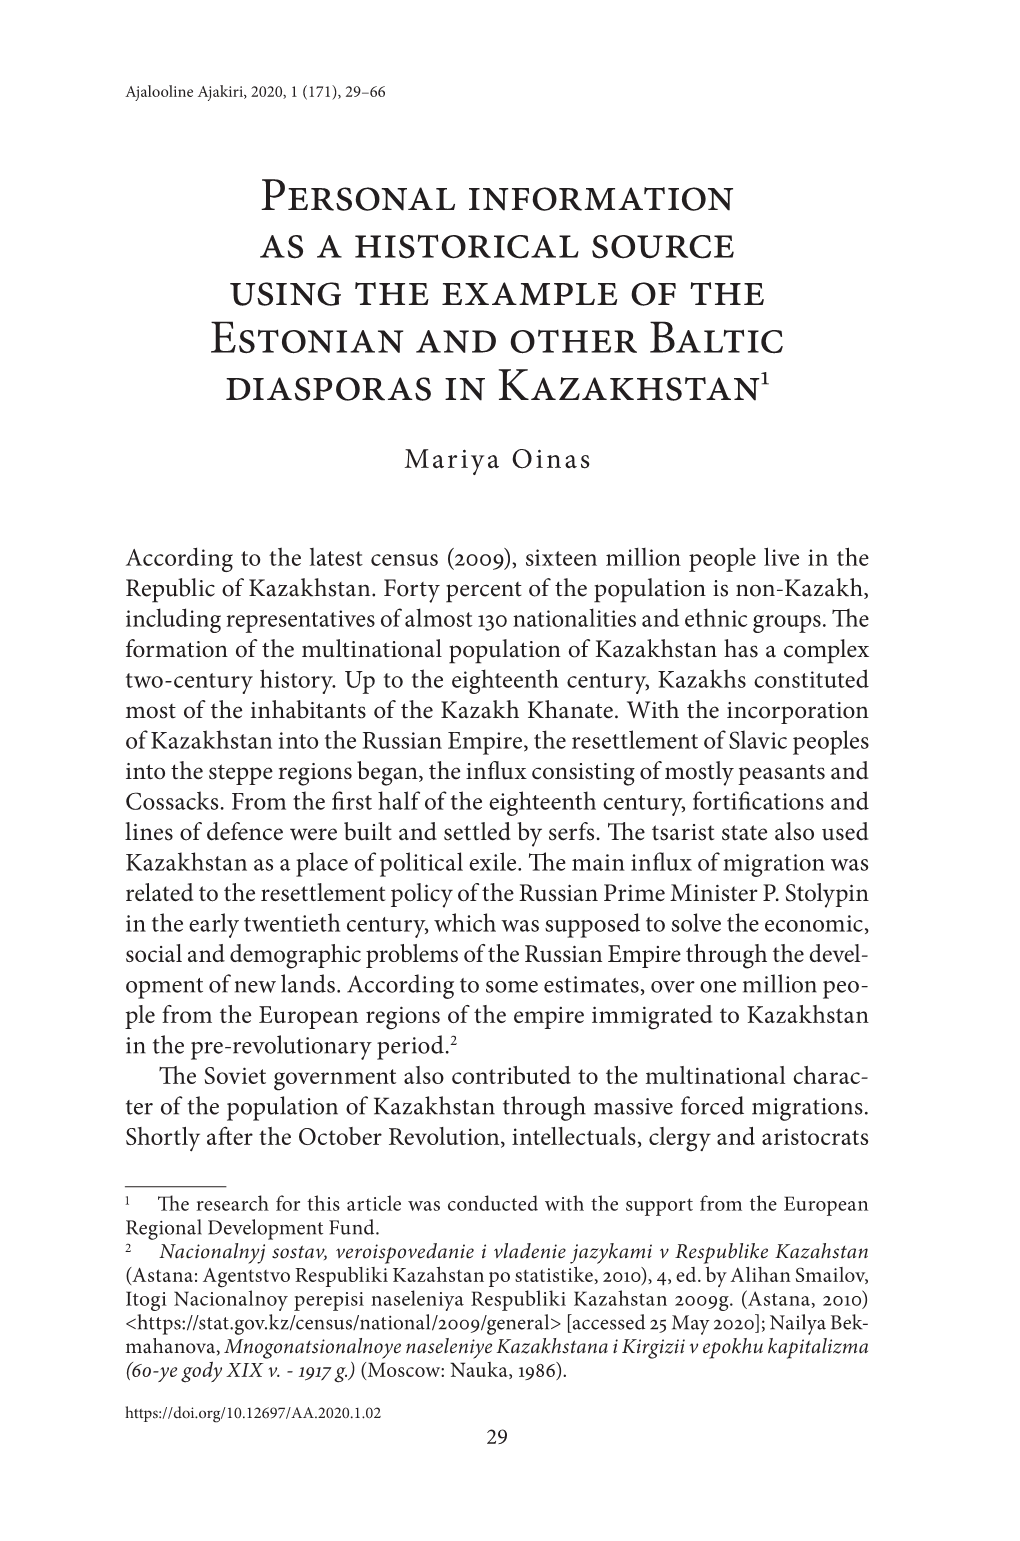 Personal Information As a Historical Source Using the Example of the Estonian and Other Baltic Diasporas in Kazakhstan1